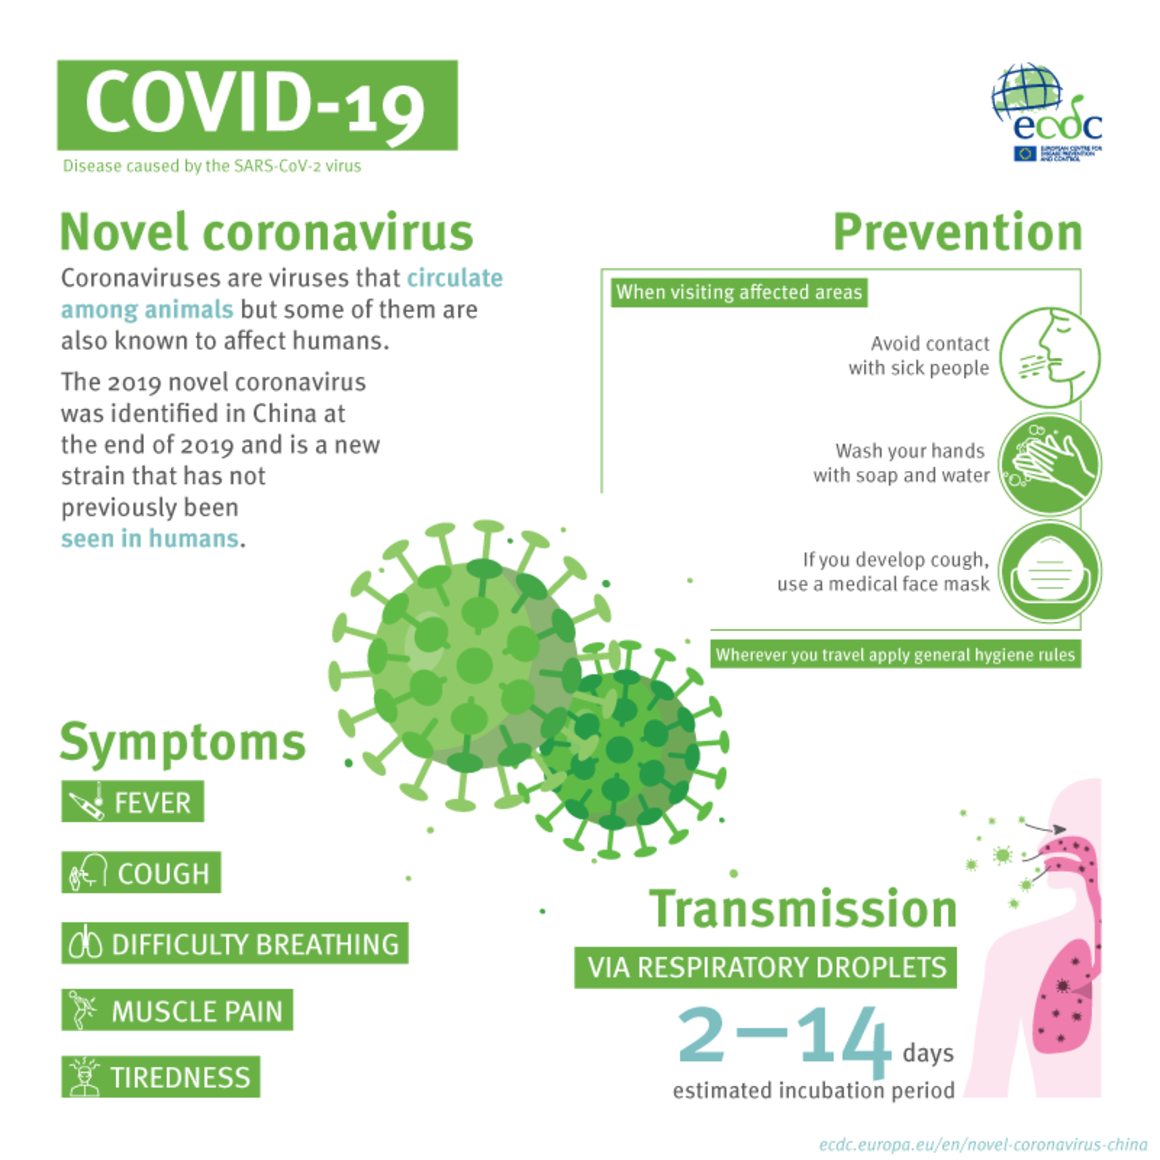 Covid-19 Symptoms and Transmission